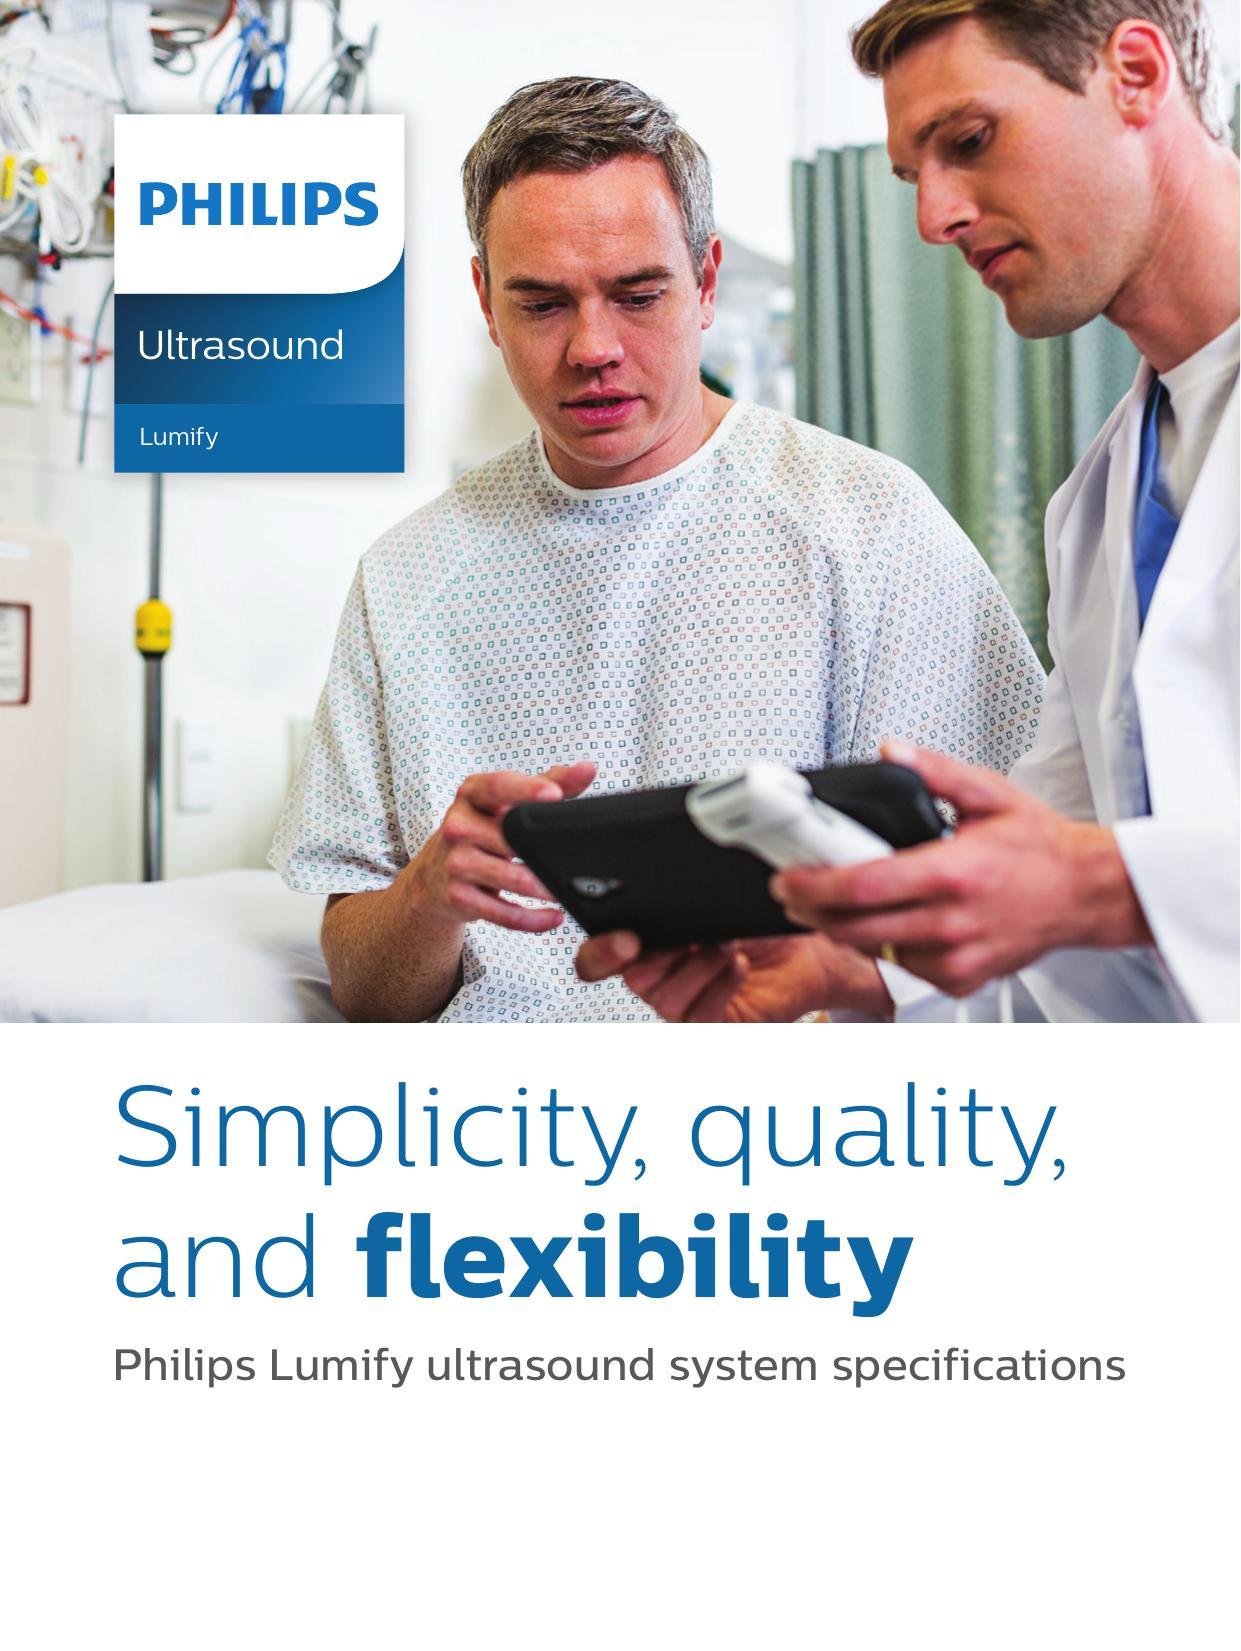 philips-lumify-ultrasound-system-user-manual.pdf